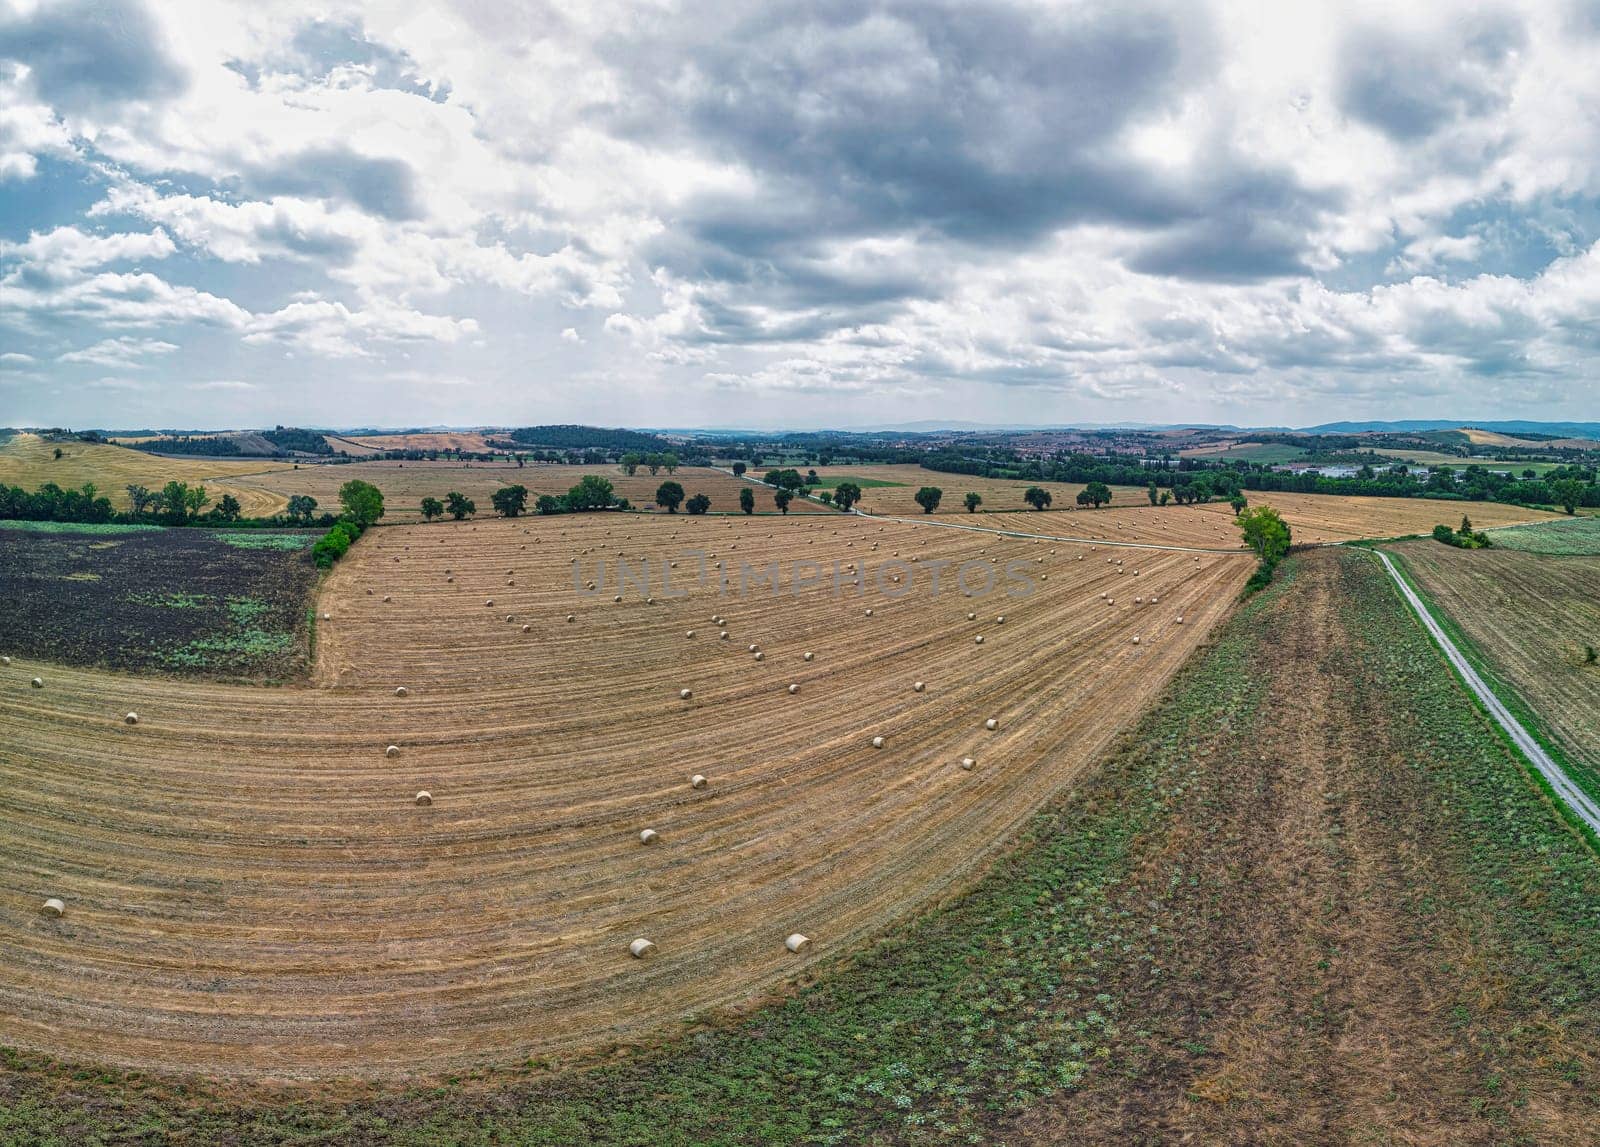 Panorama of Tuscany, hills and fields. Italy, Europe by mot1963